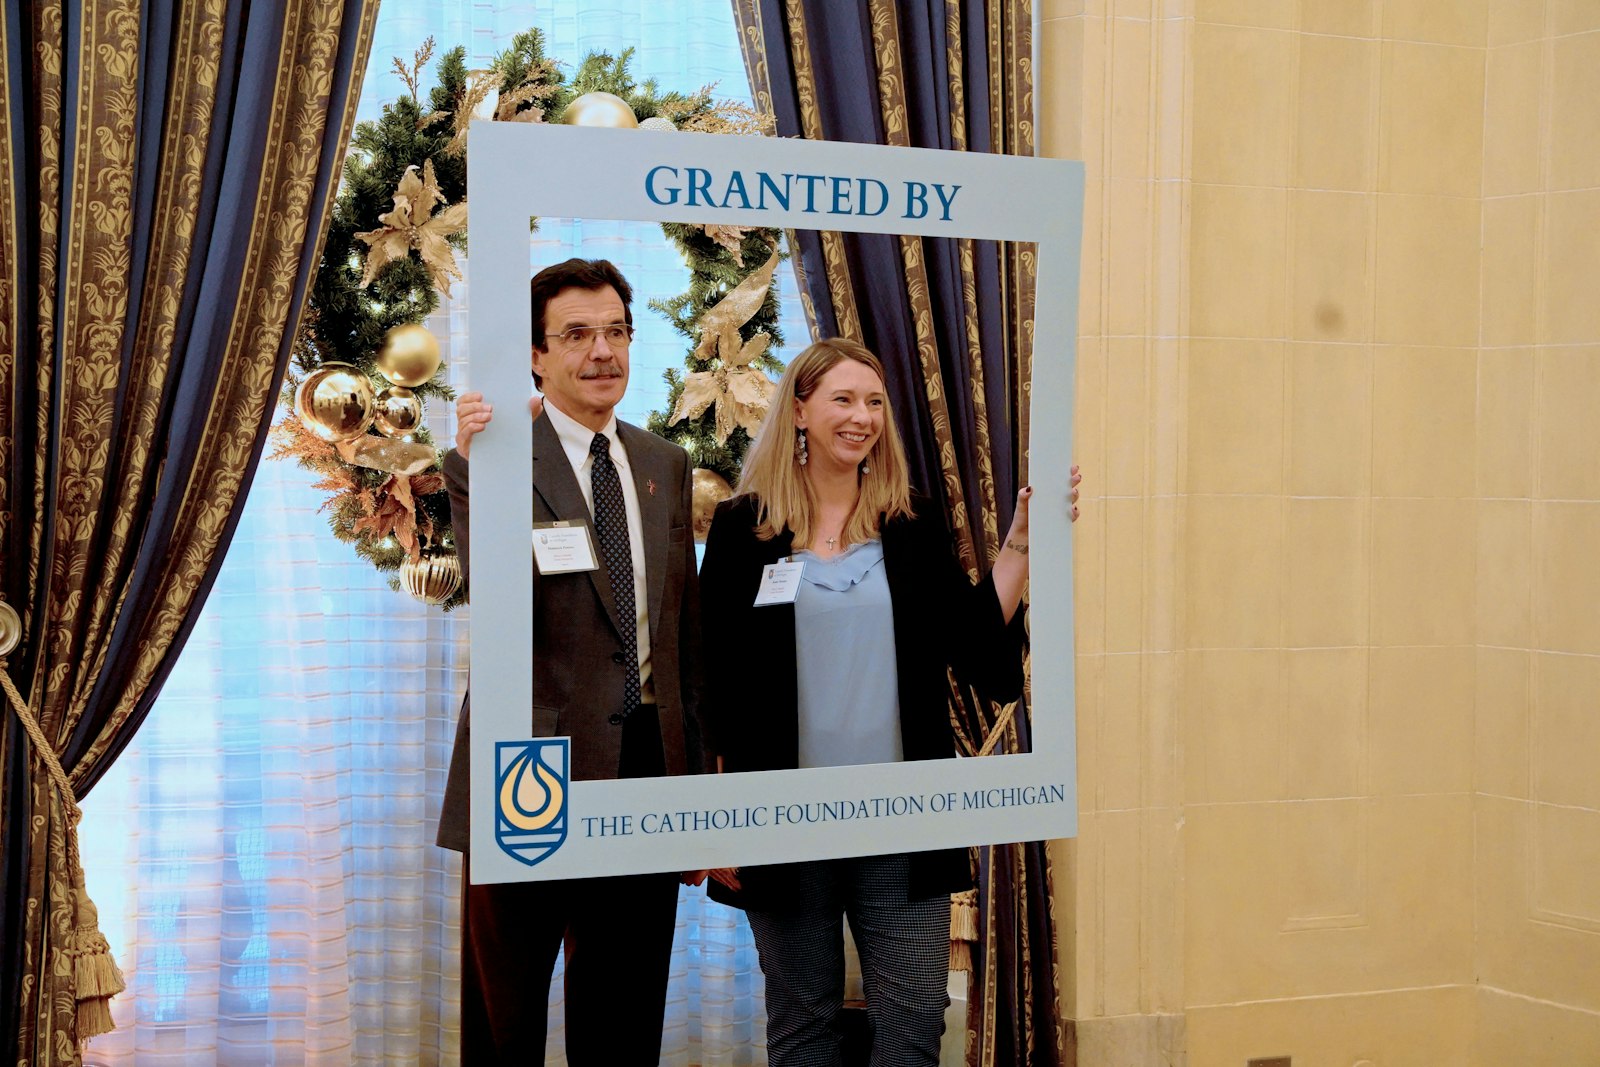 Deacon Dominick Pastore and Katie Montes of Mary's Mantle pose for a photograph after receiving a $4,850 grant to support a mentoring program for expectant mothers. Thirty-two Catholic parishes, schools and organizations were awarded grants during the Catholic Foundation of Michigan's award ceremony at the Detroit Athletic Club on Dec. 15.